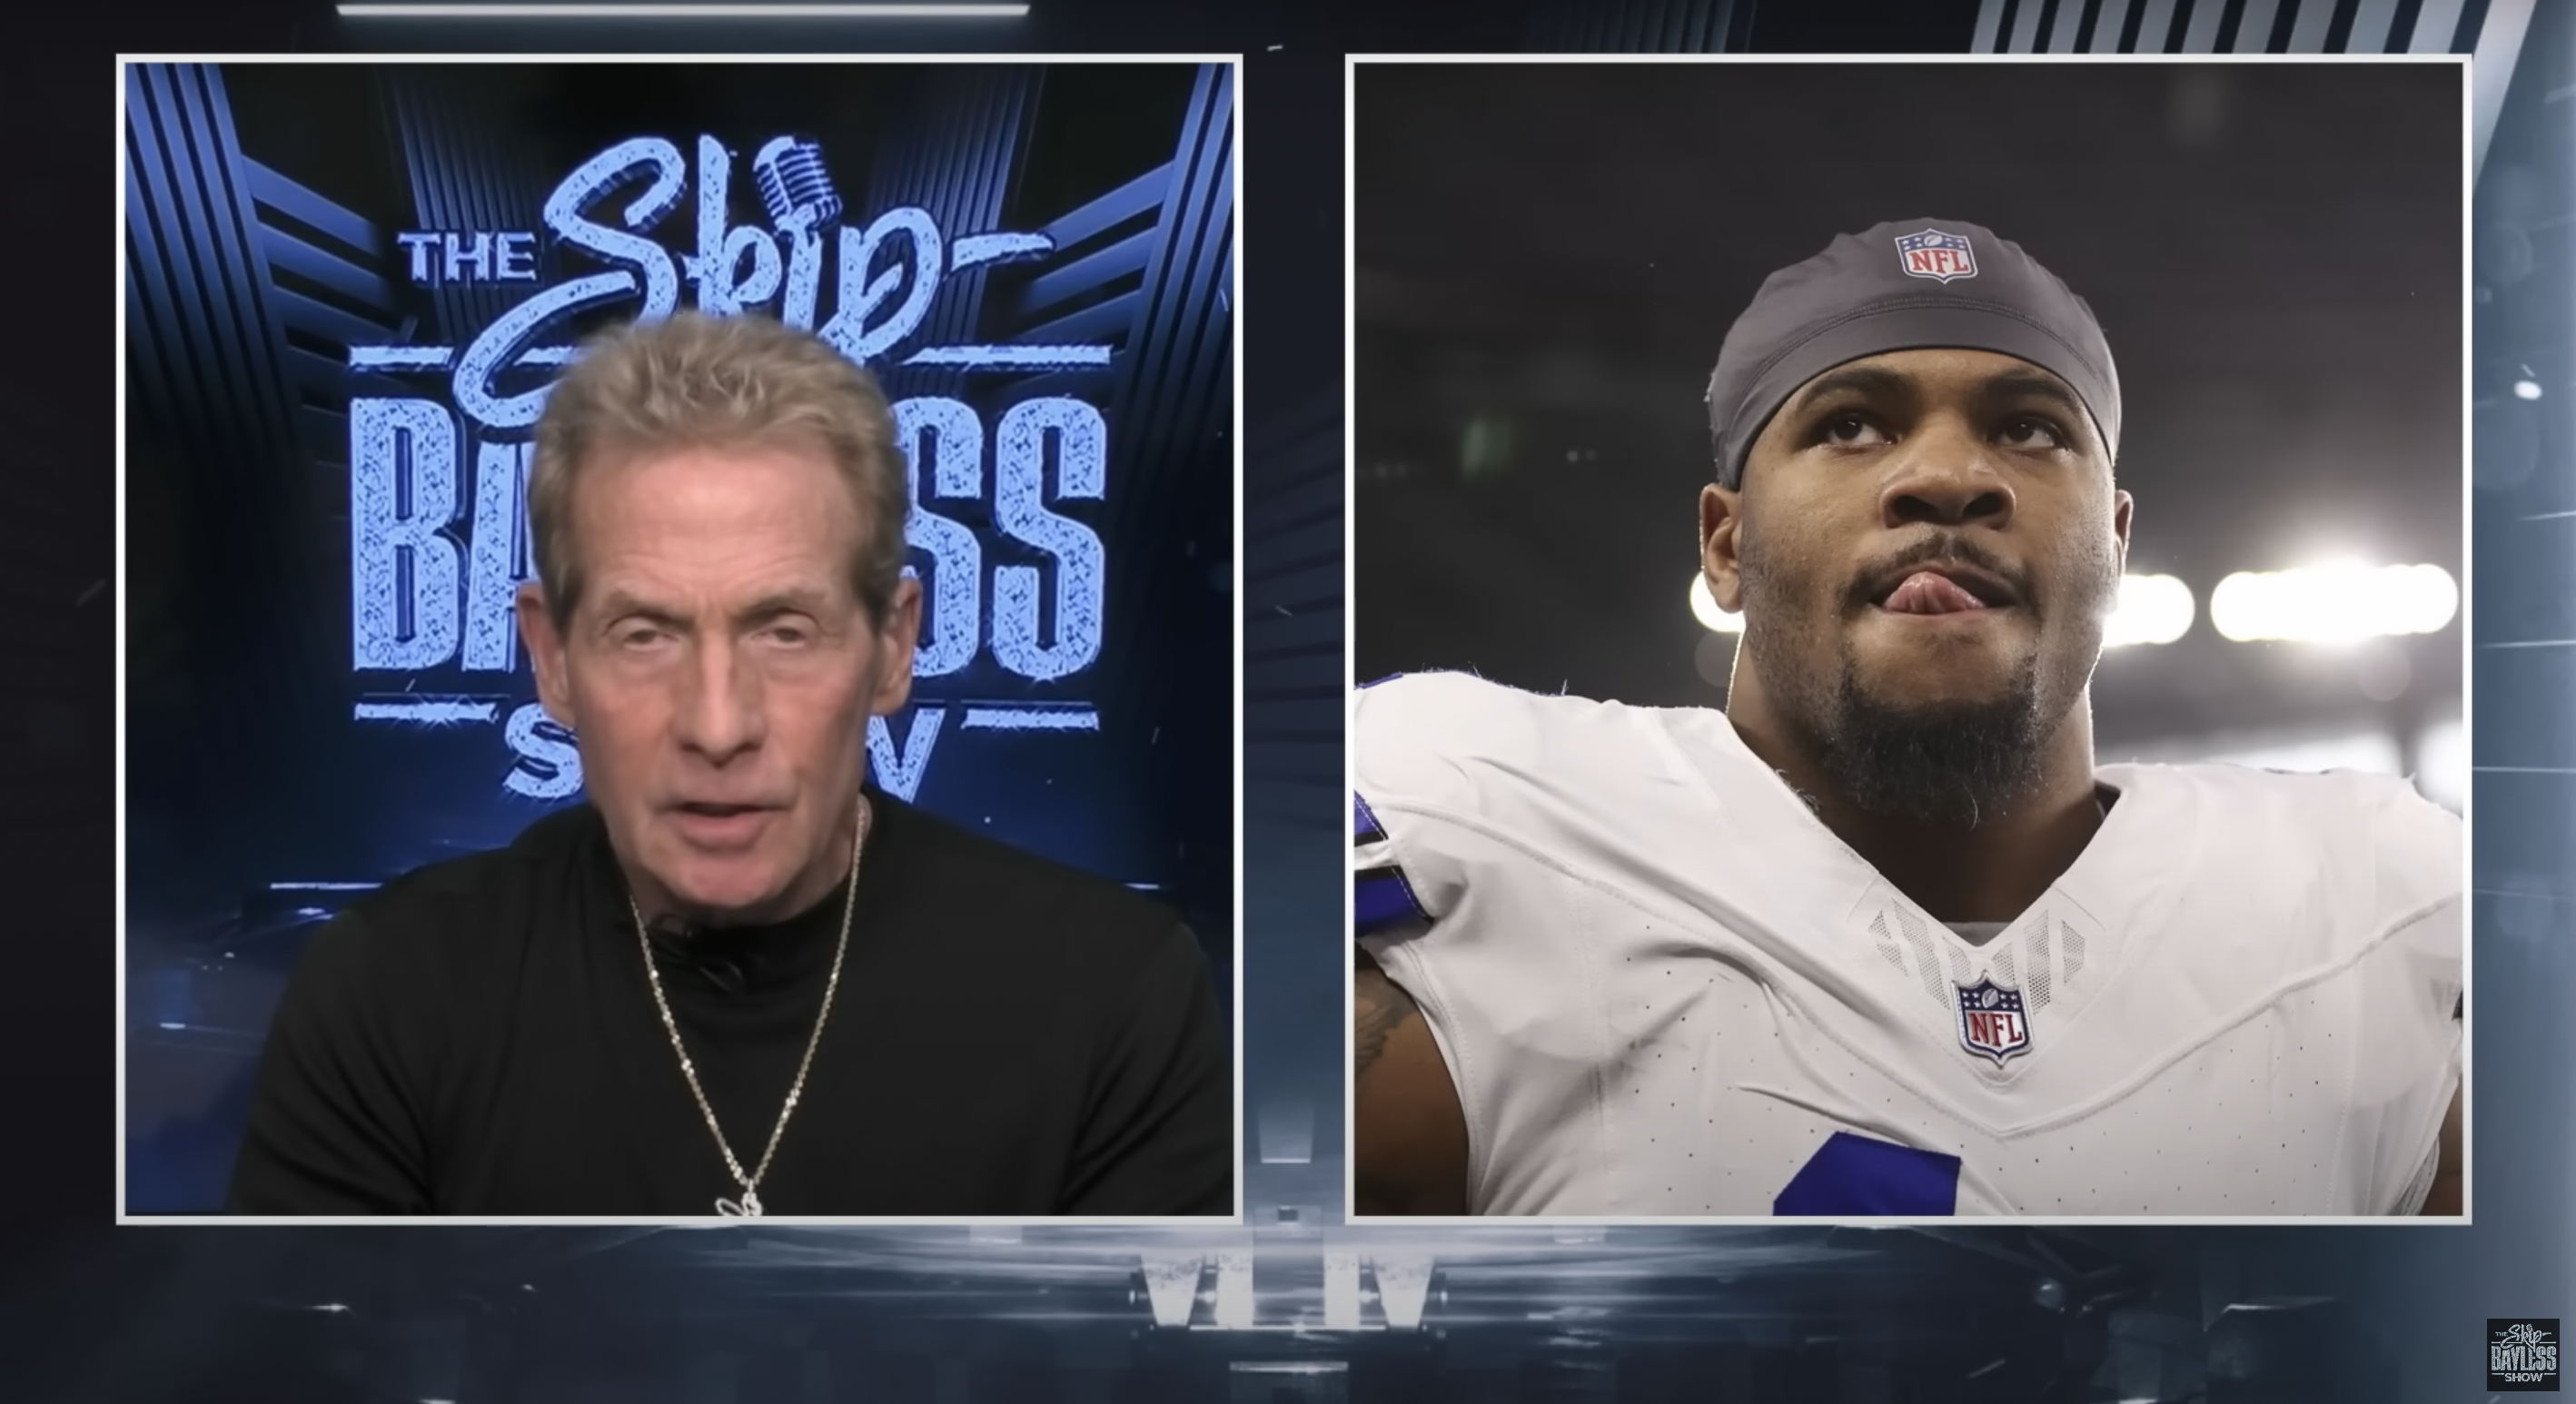 Skip Bayless responds to Micah Parsons on his "The Skip Bayless Show" podcast.